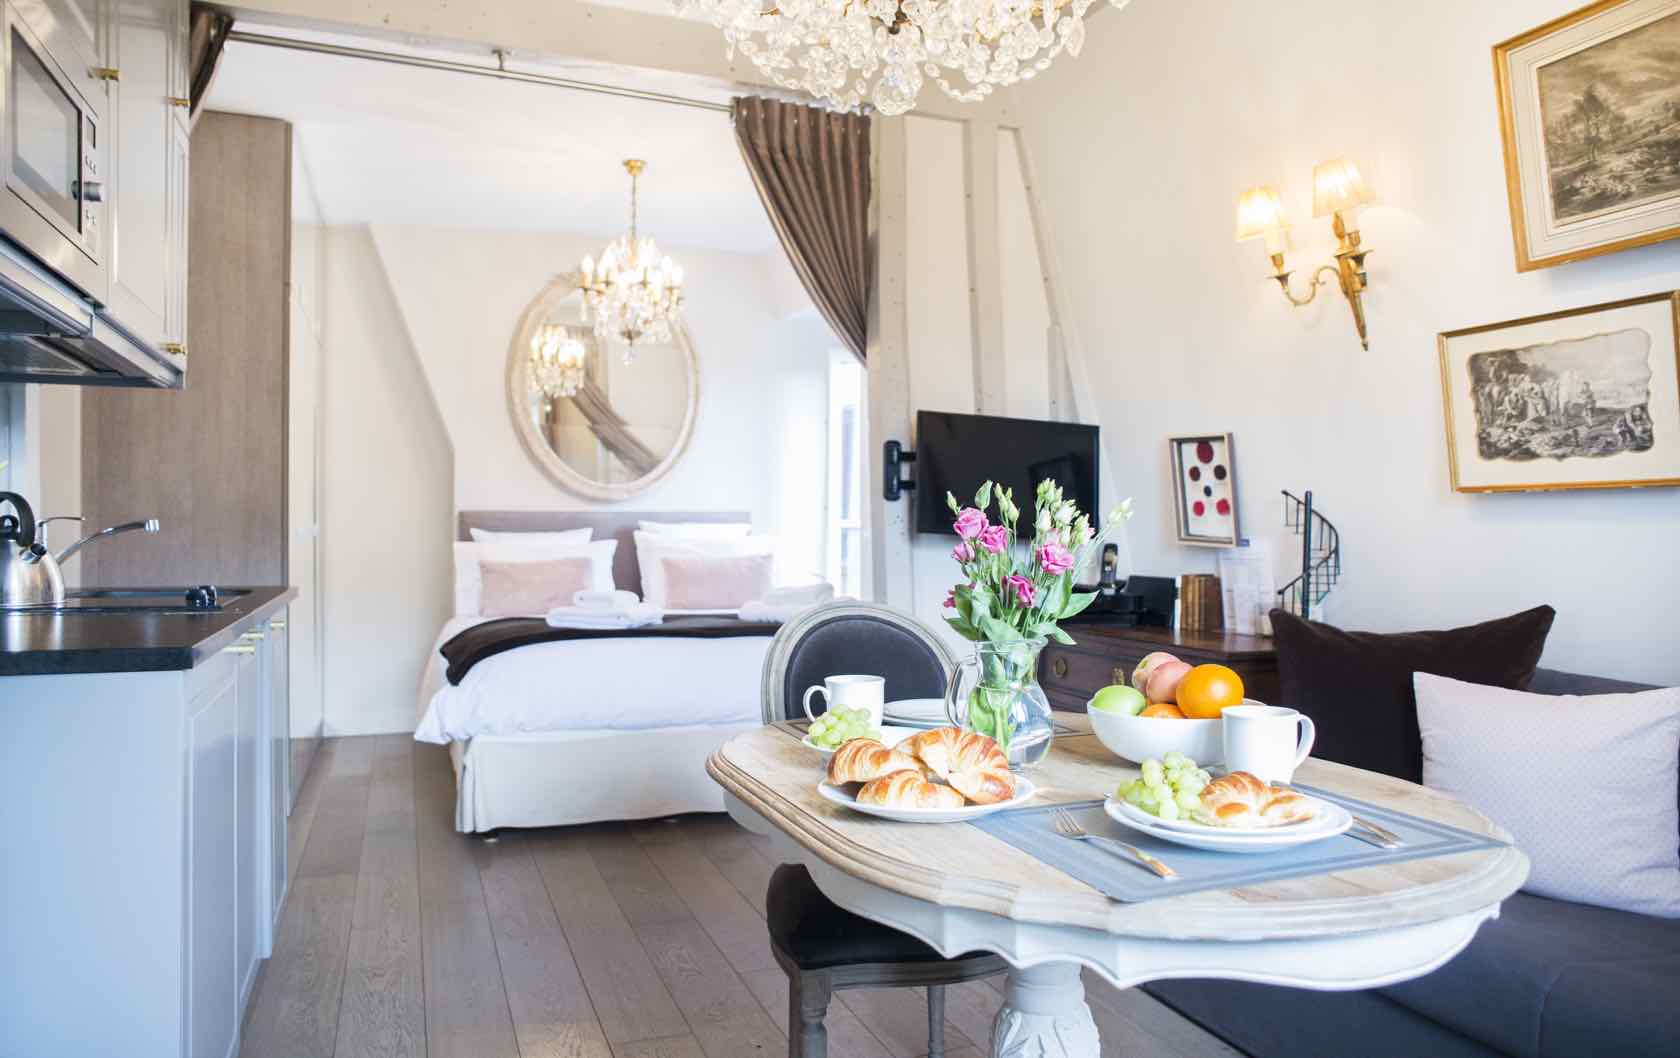 10 Reasons to Love the Crémant, the Latest Paris Perfect Shared Apartment